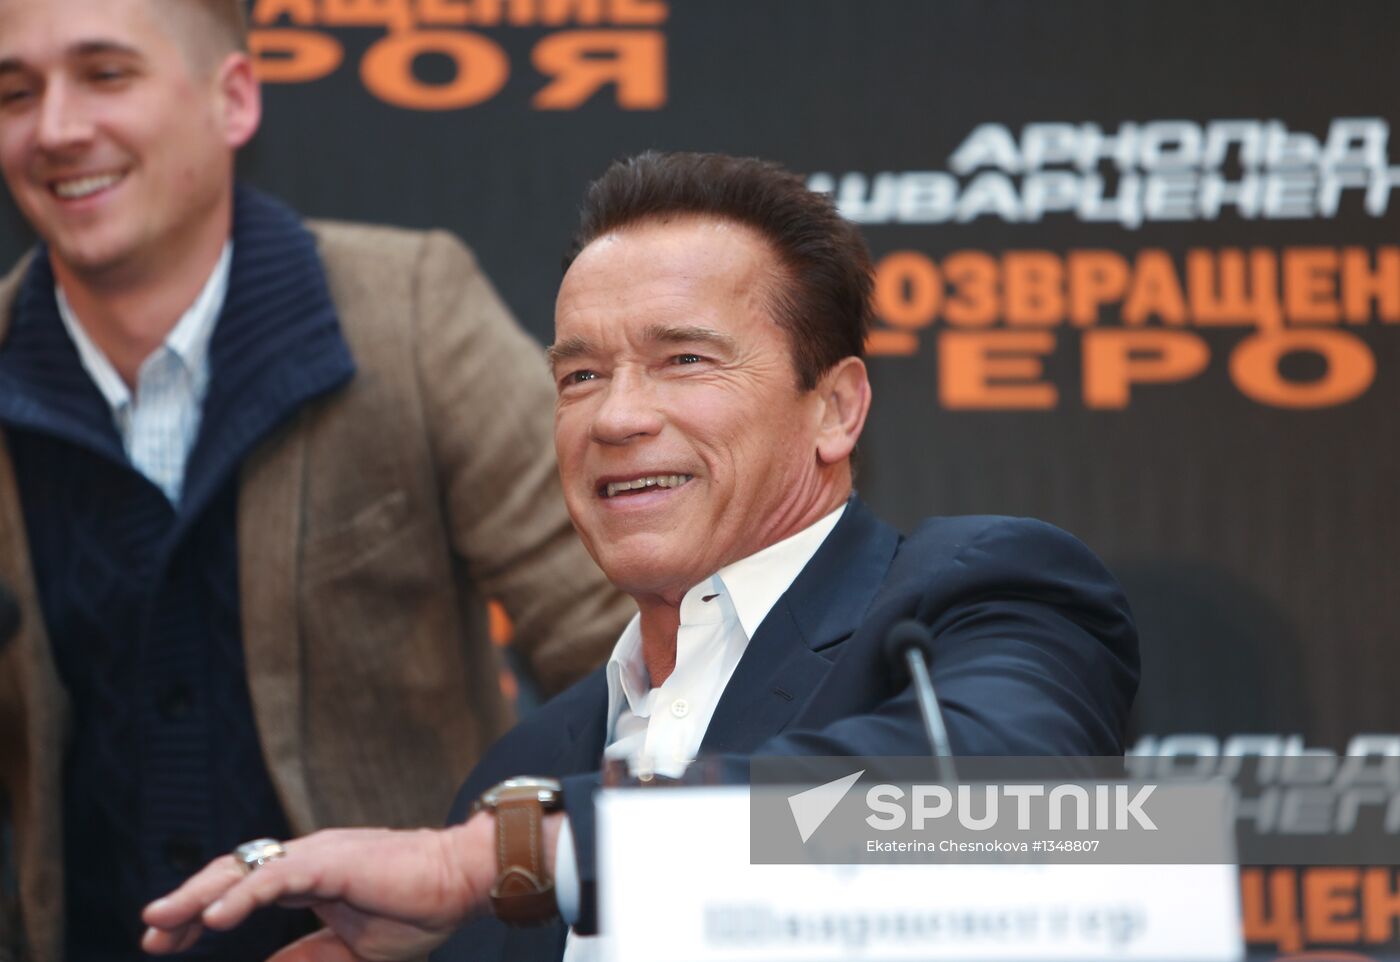 Photo call with Arnold Schwarzenegger and Johnny Knoxville